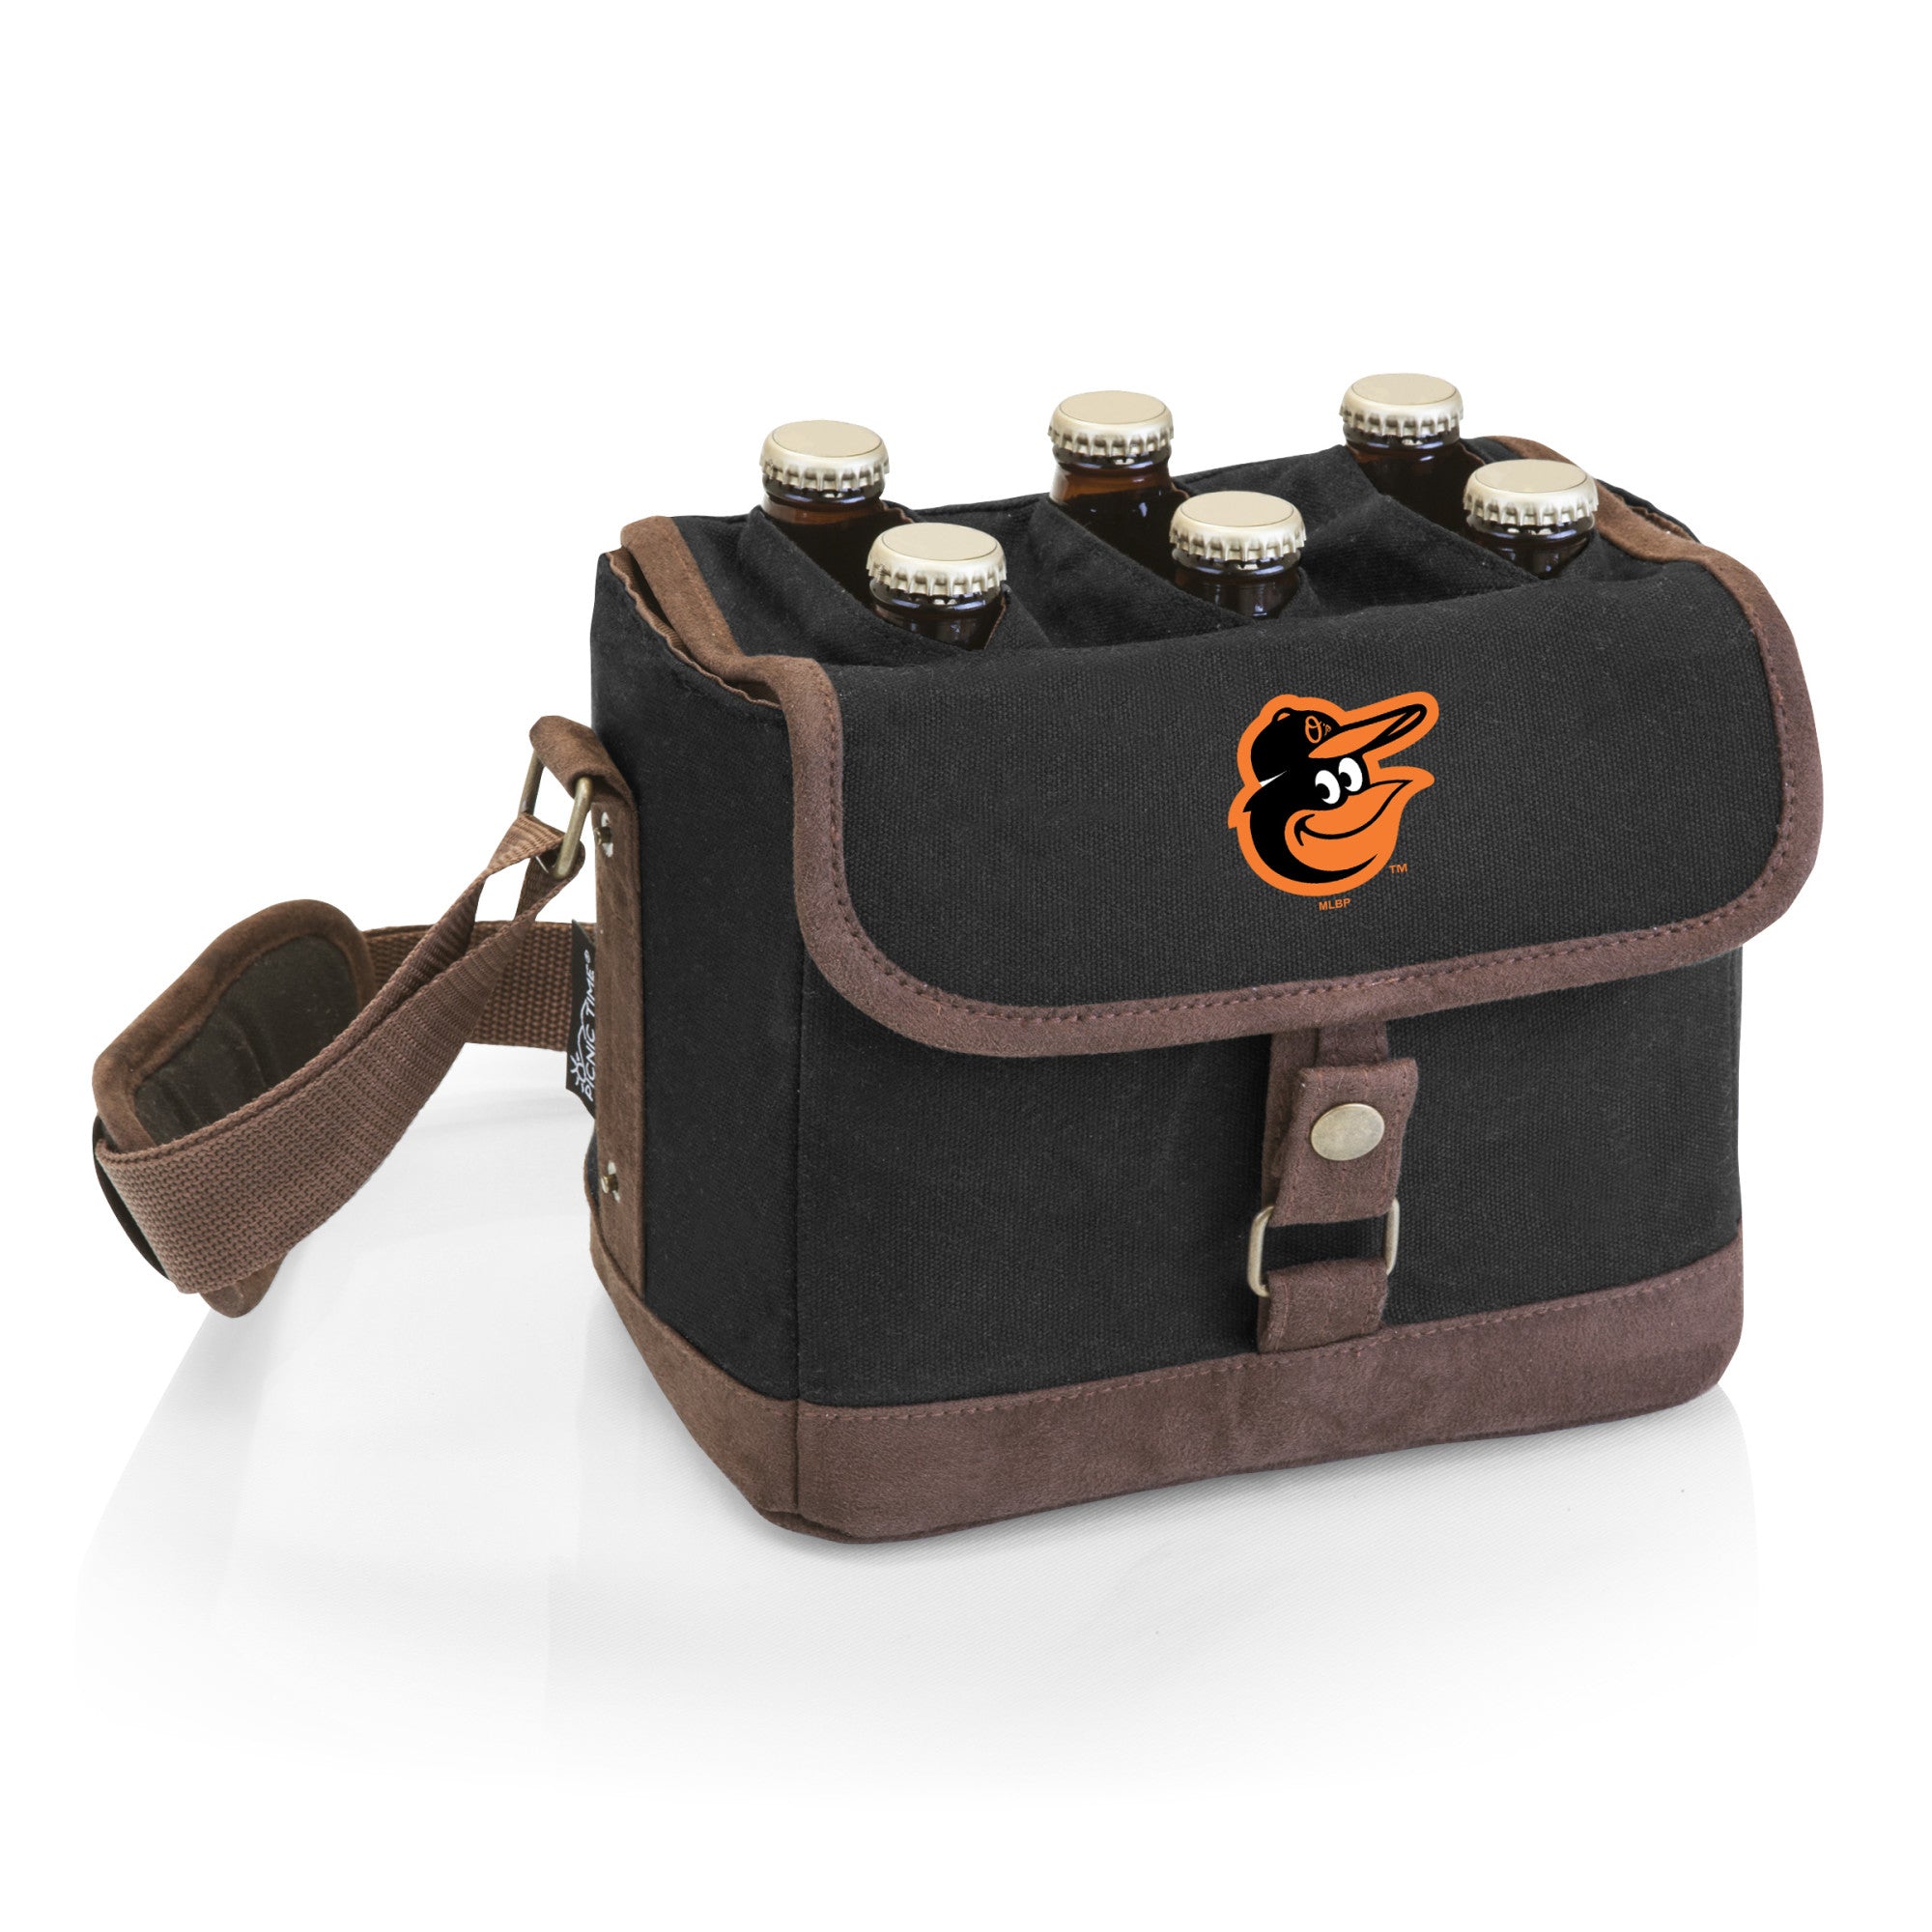 Baltimore Orioles - Beer Caddy Cooler Tote with Opener